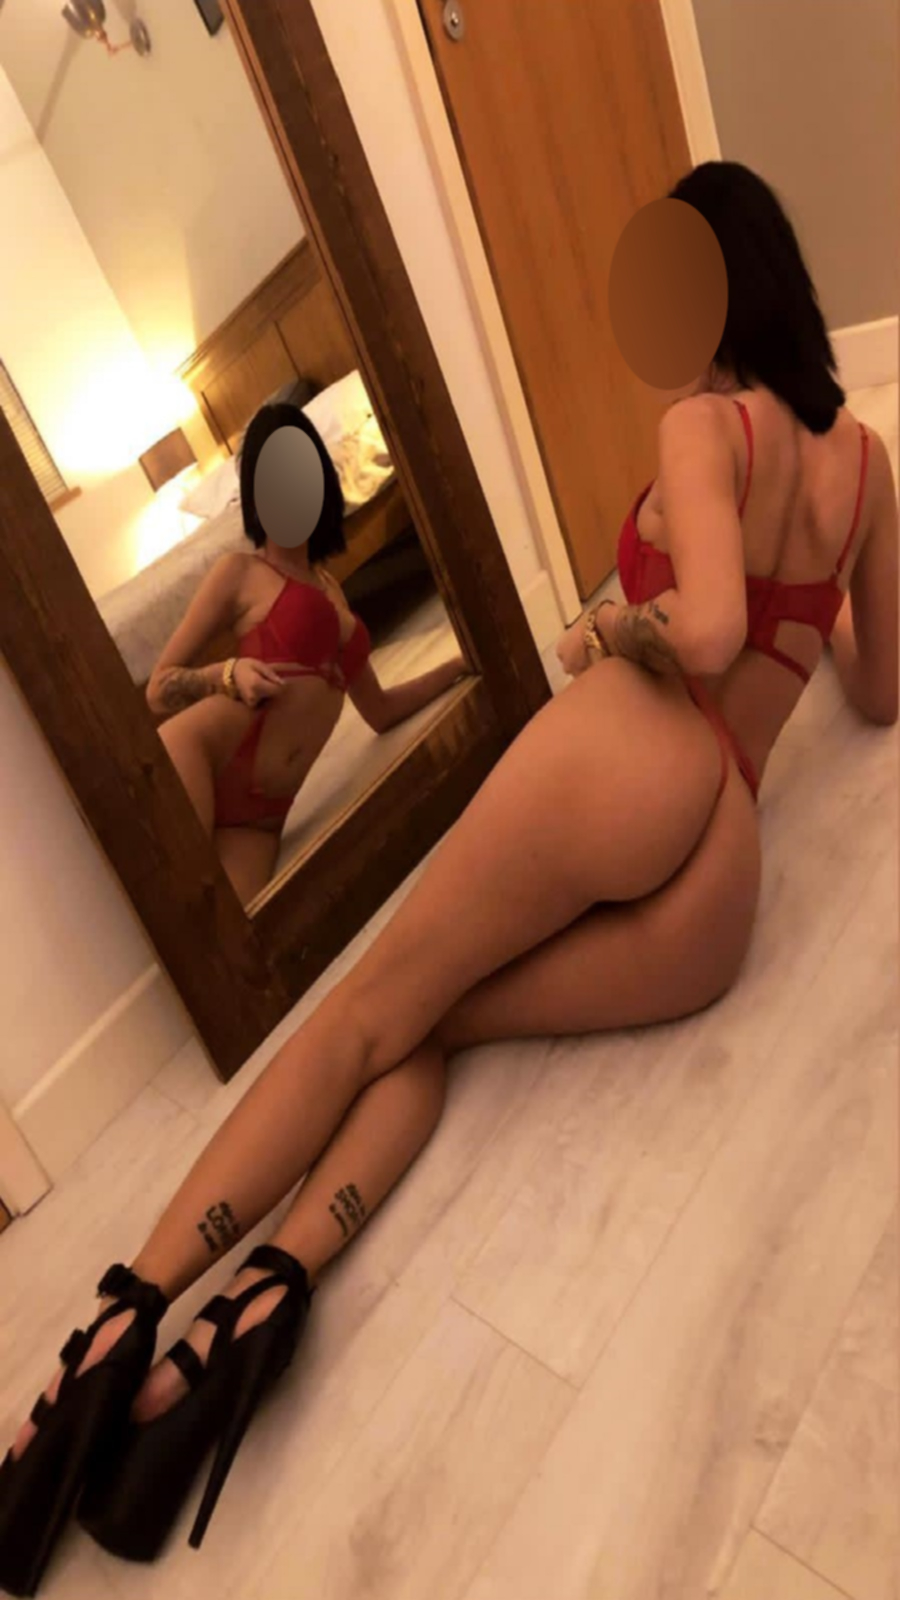 If you are looking for the perfect companion tonight give us a call on 07729780847 to book Christina for the best night of your life.